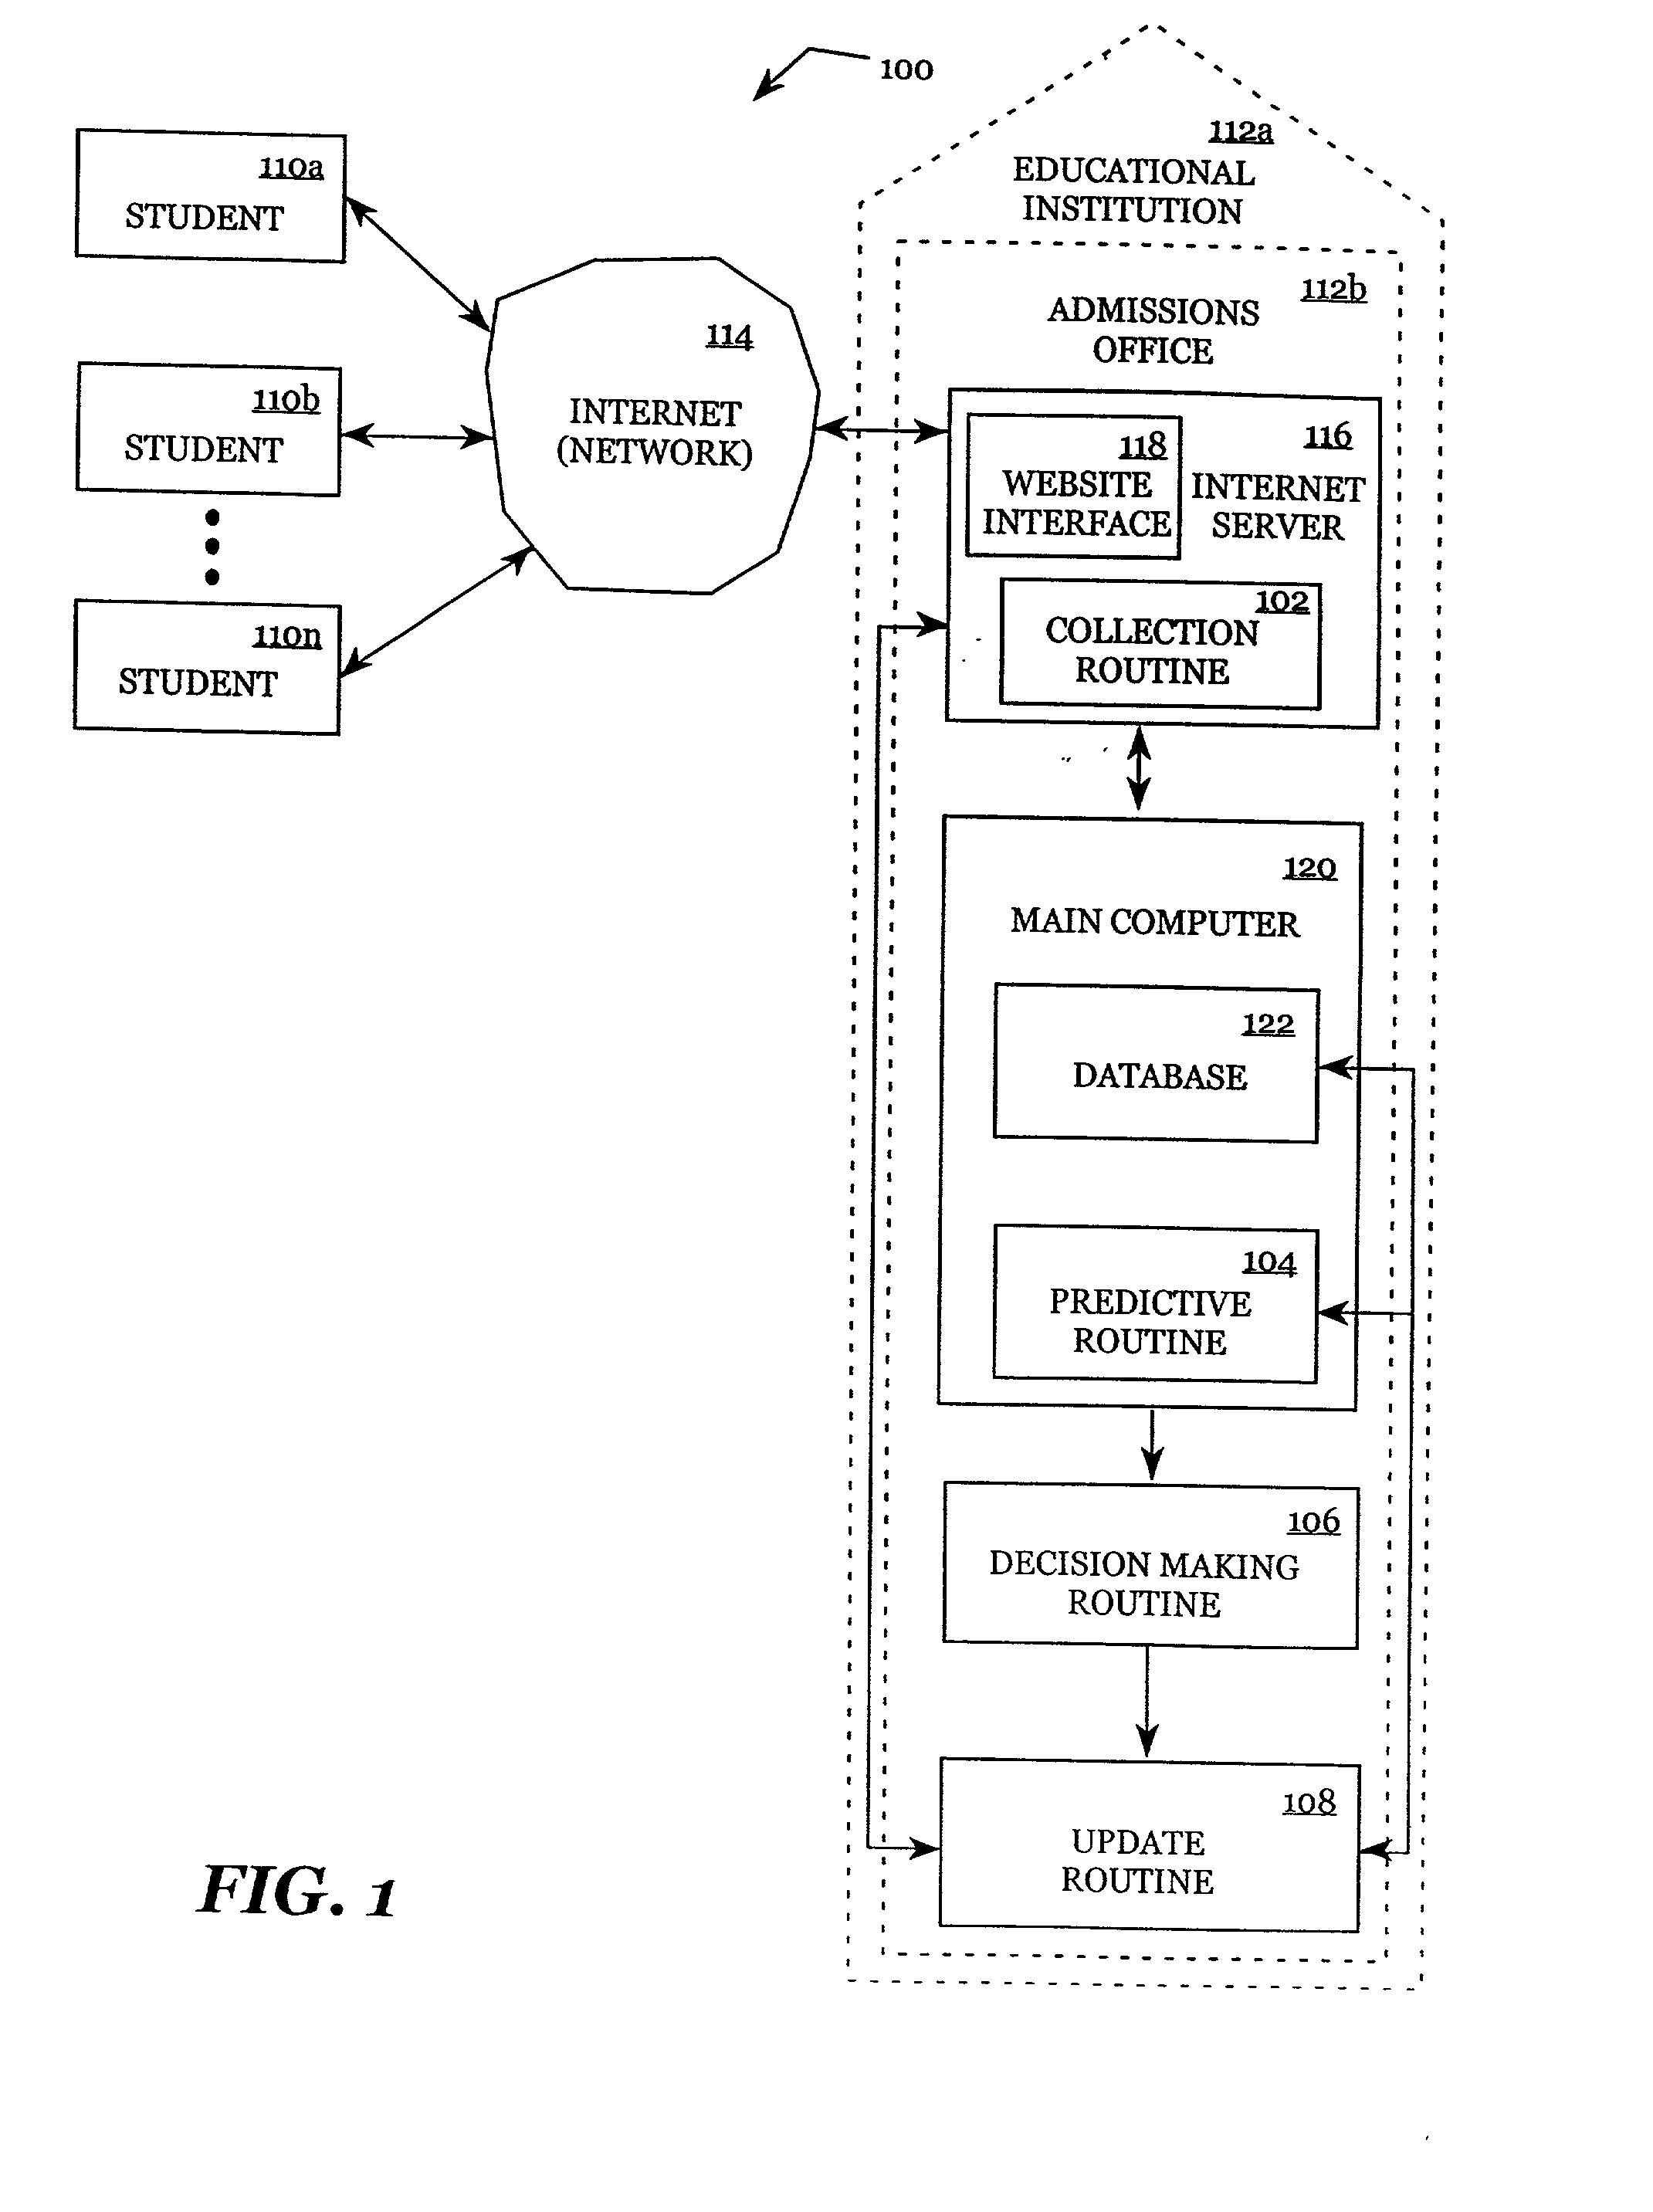 Systems and methods for making a prediction utilizing admissions-based information